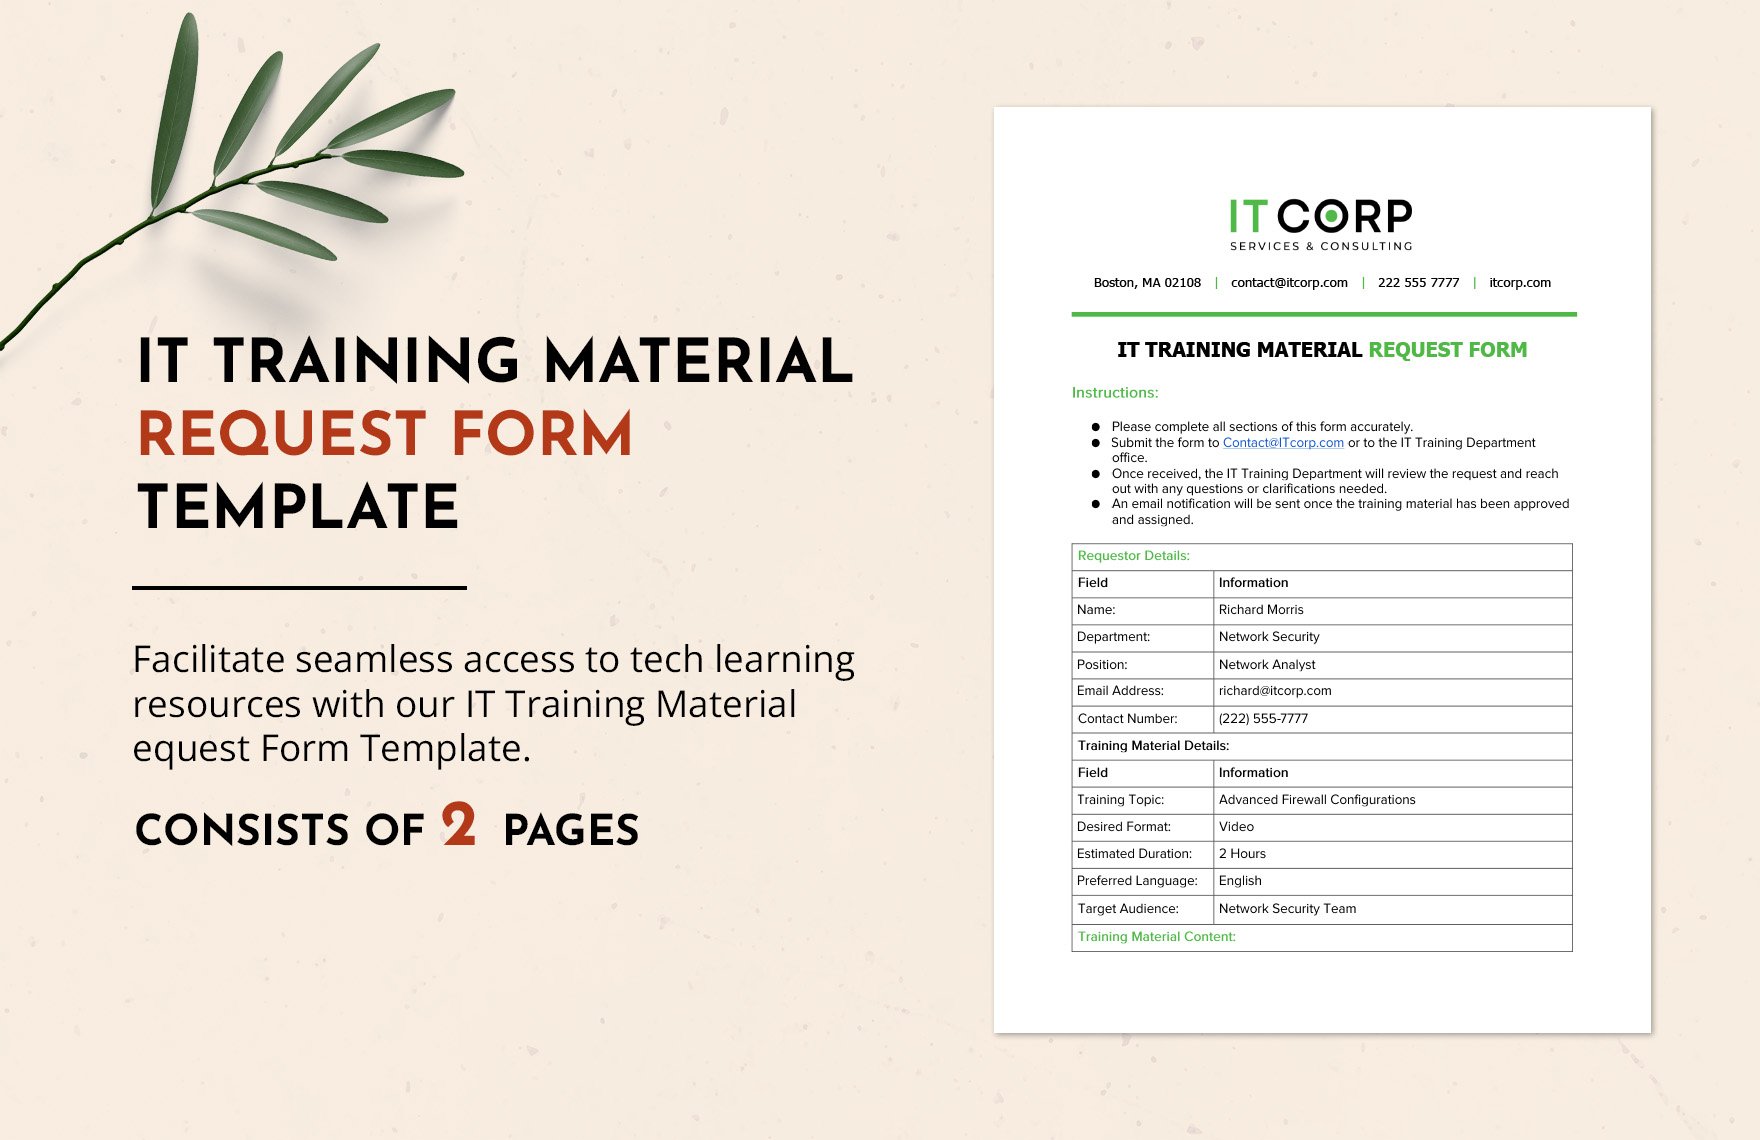 IT Training Material Request Form Template